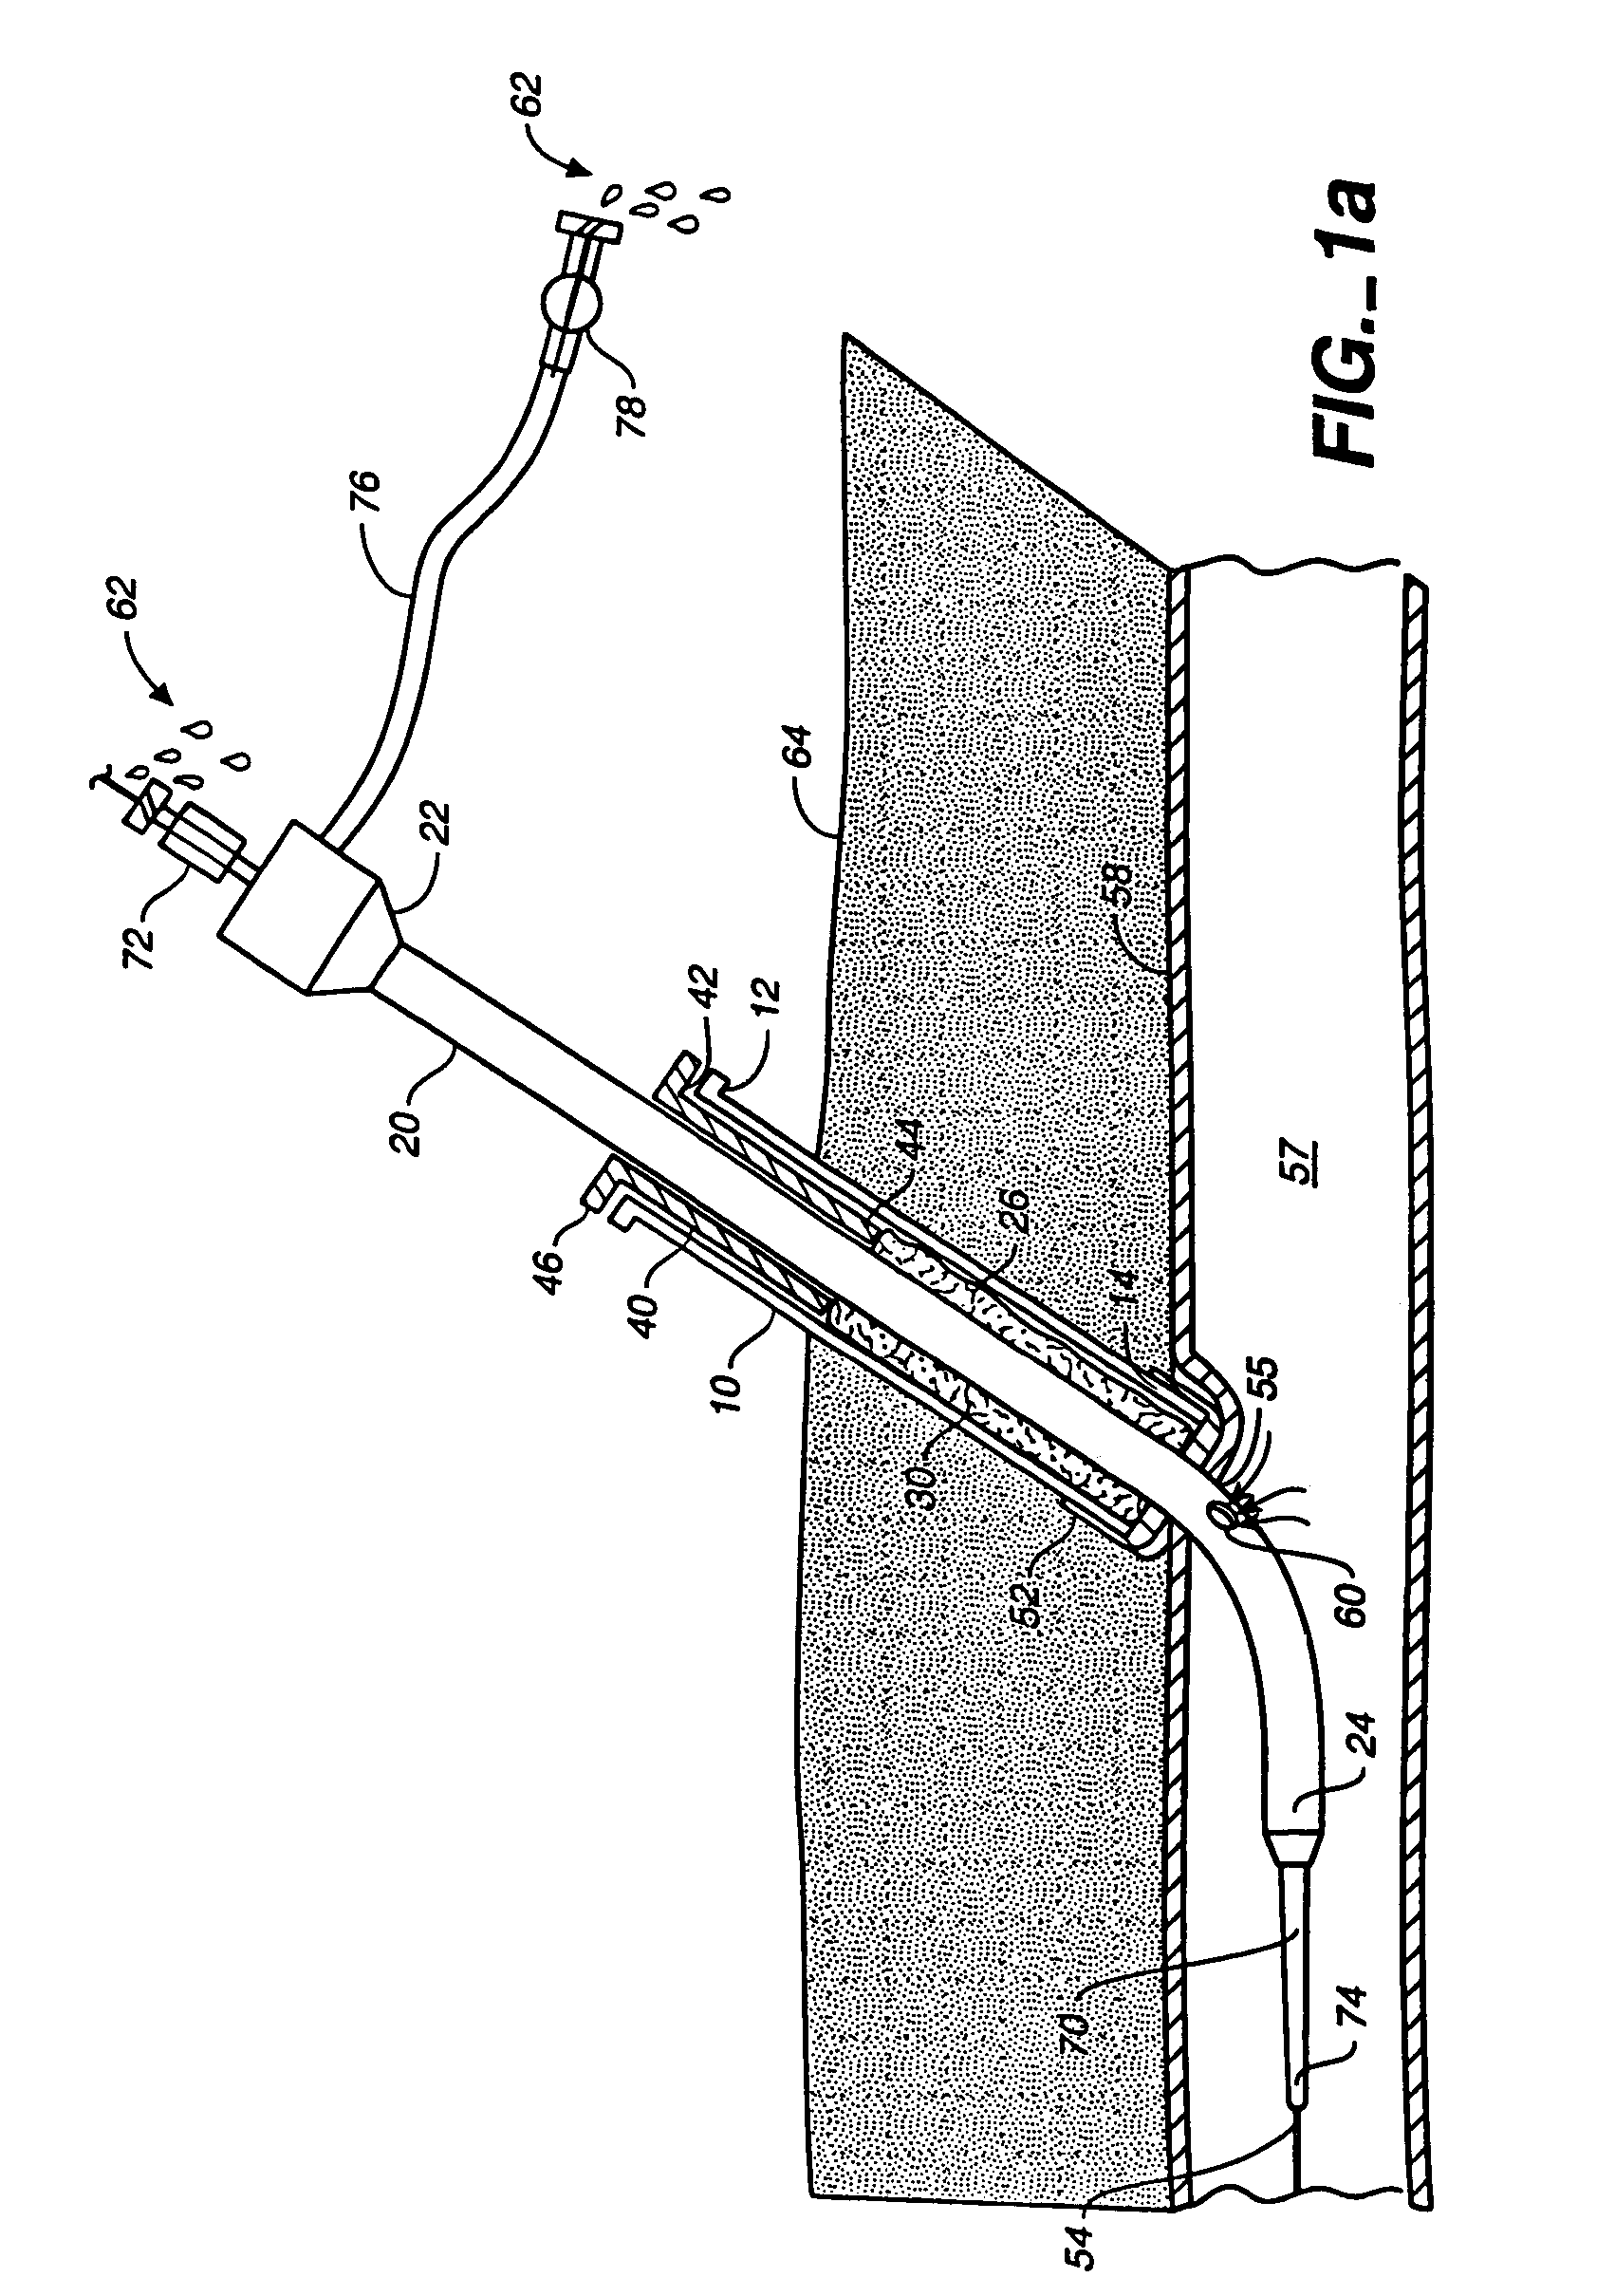 Sheath-mounted arterial plug delivery device